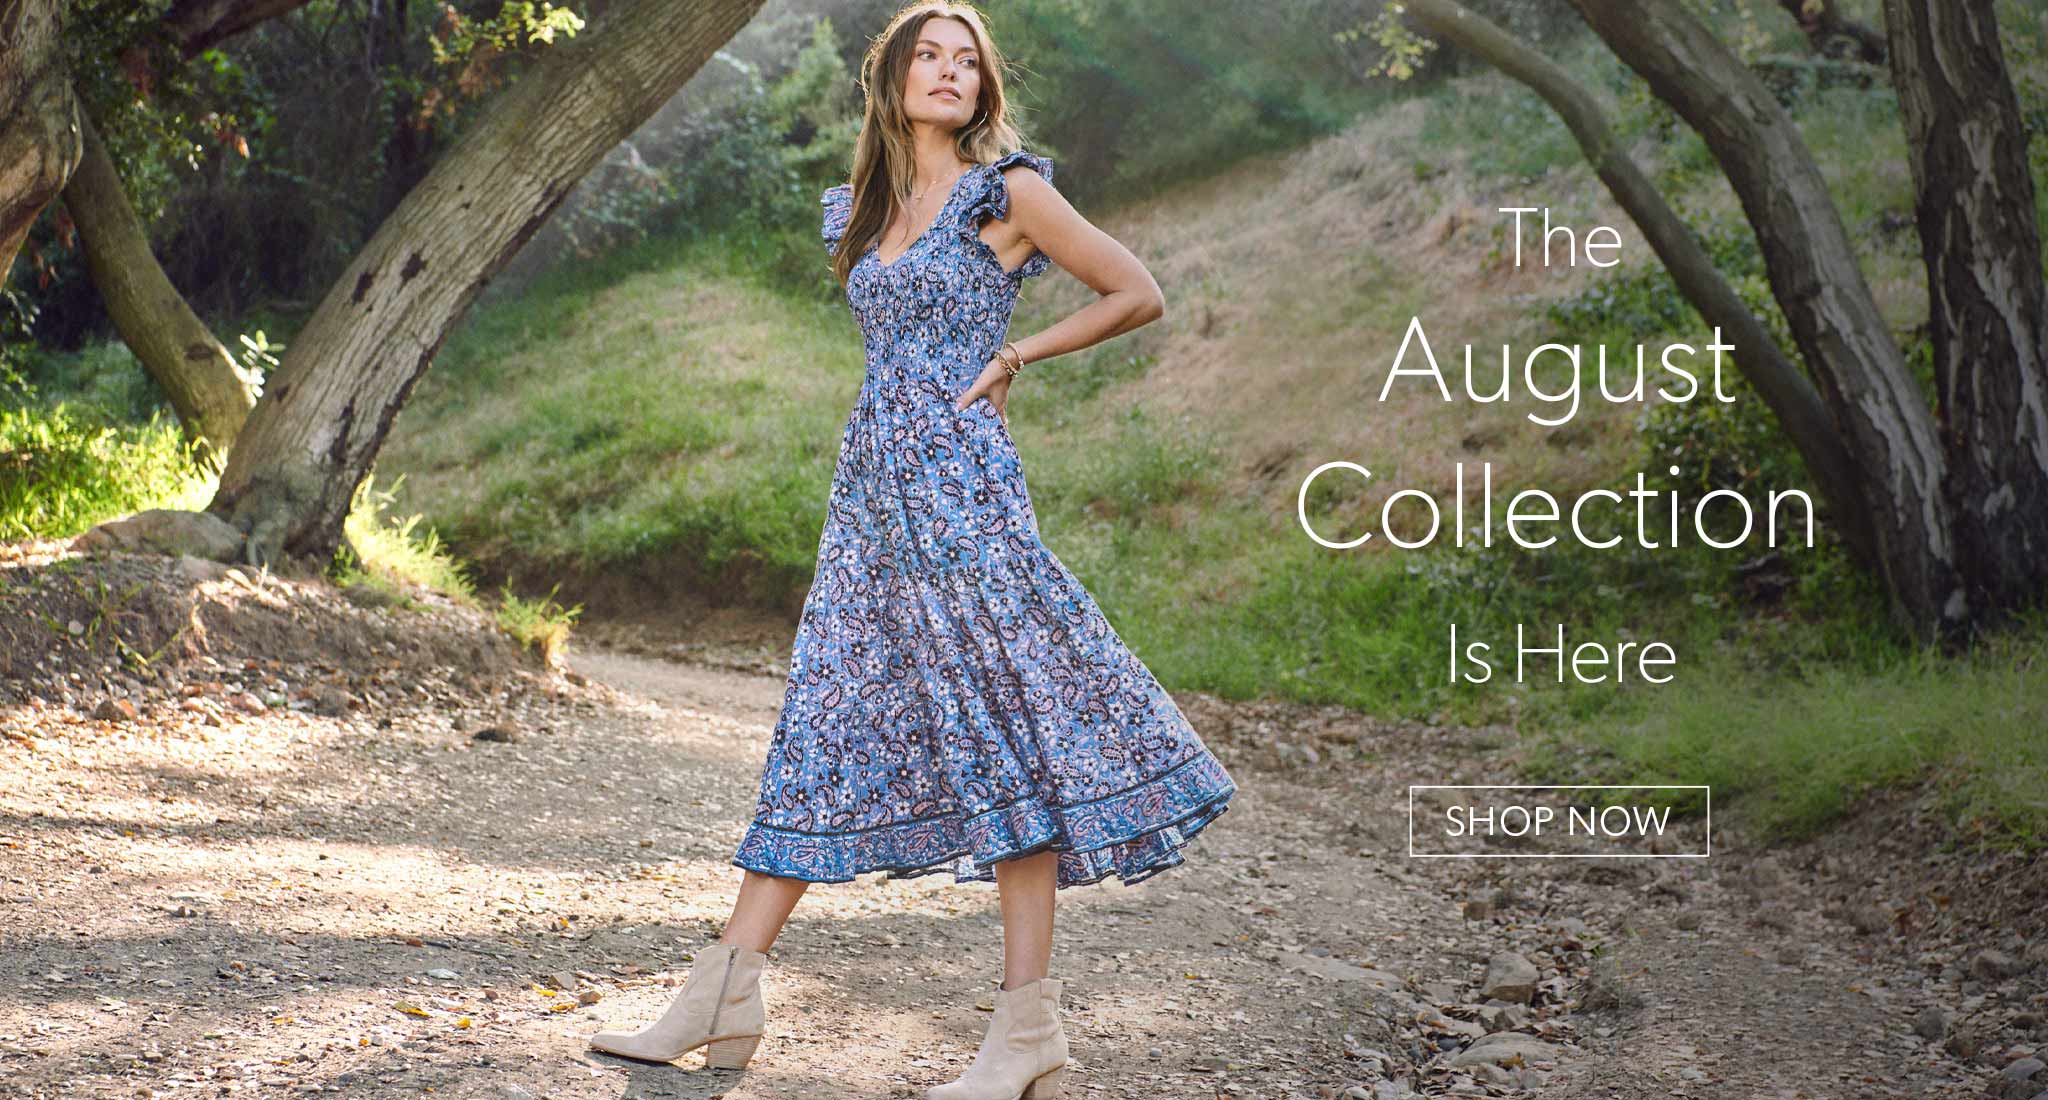 The August Collection is here - Shop Now